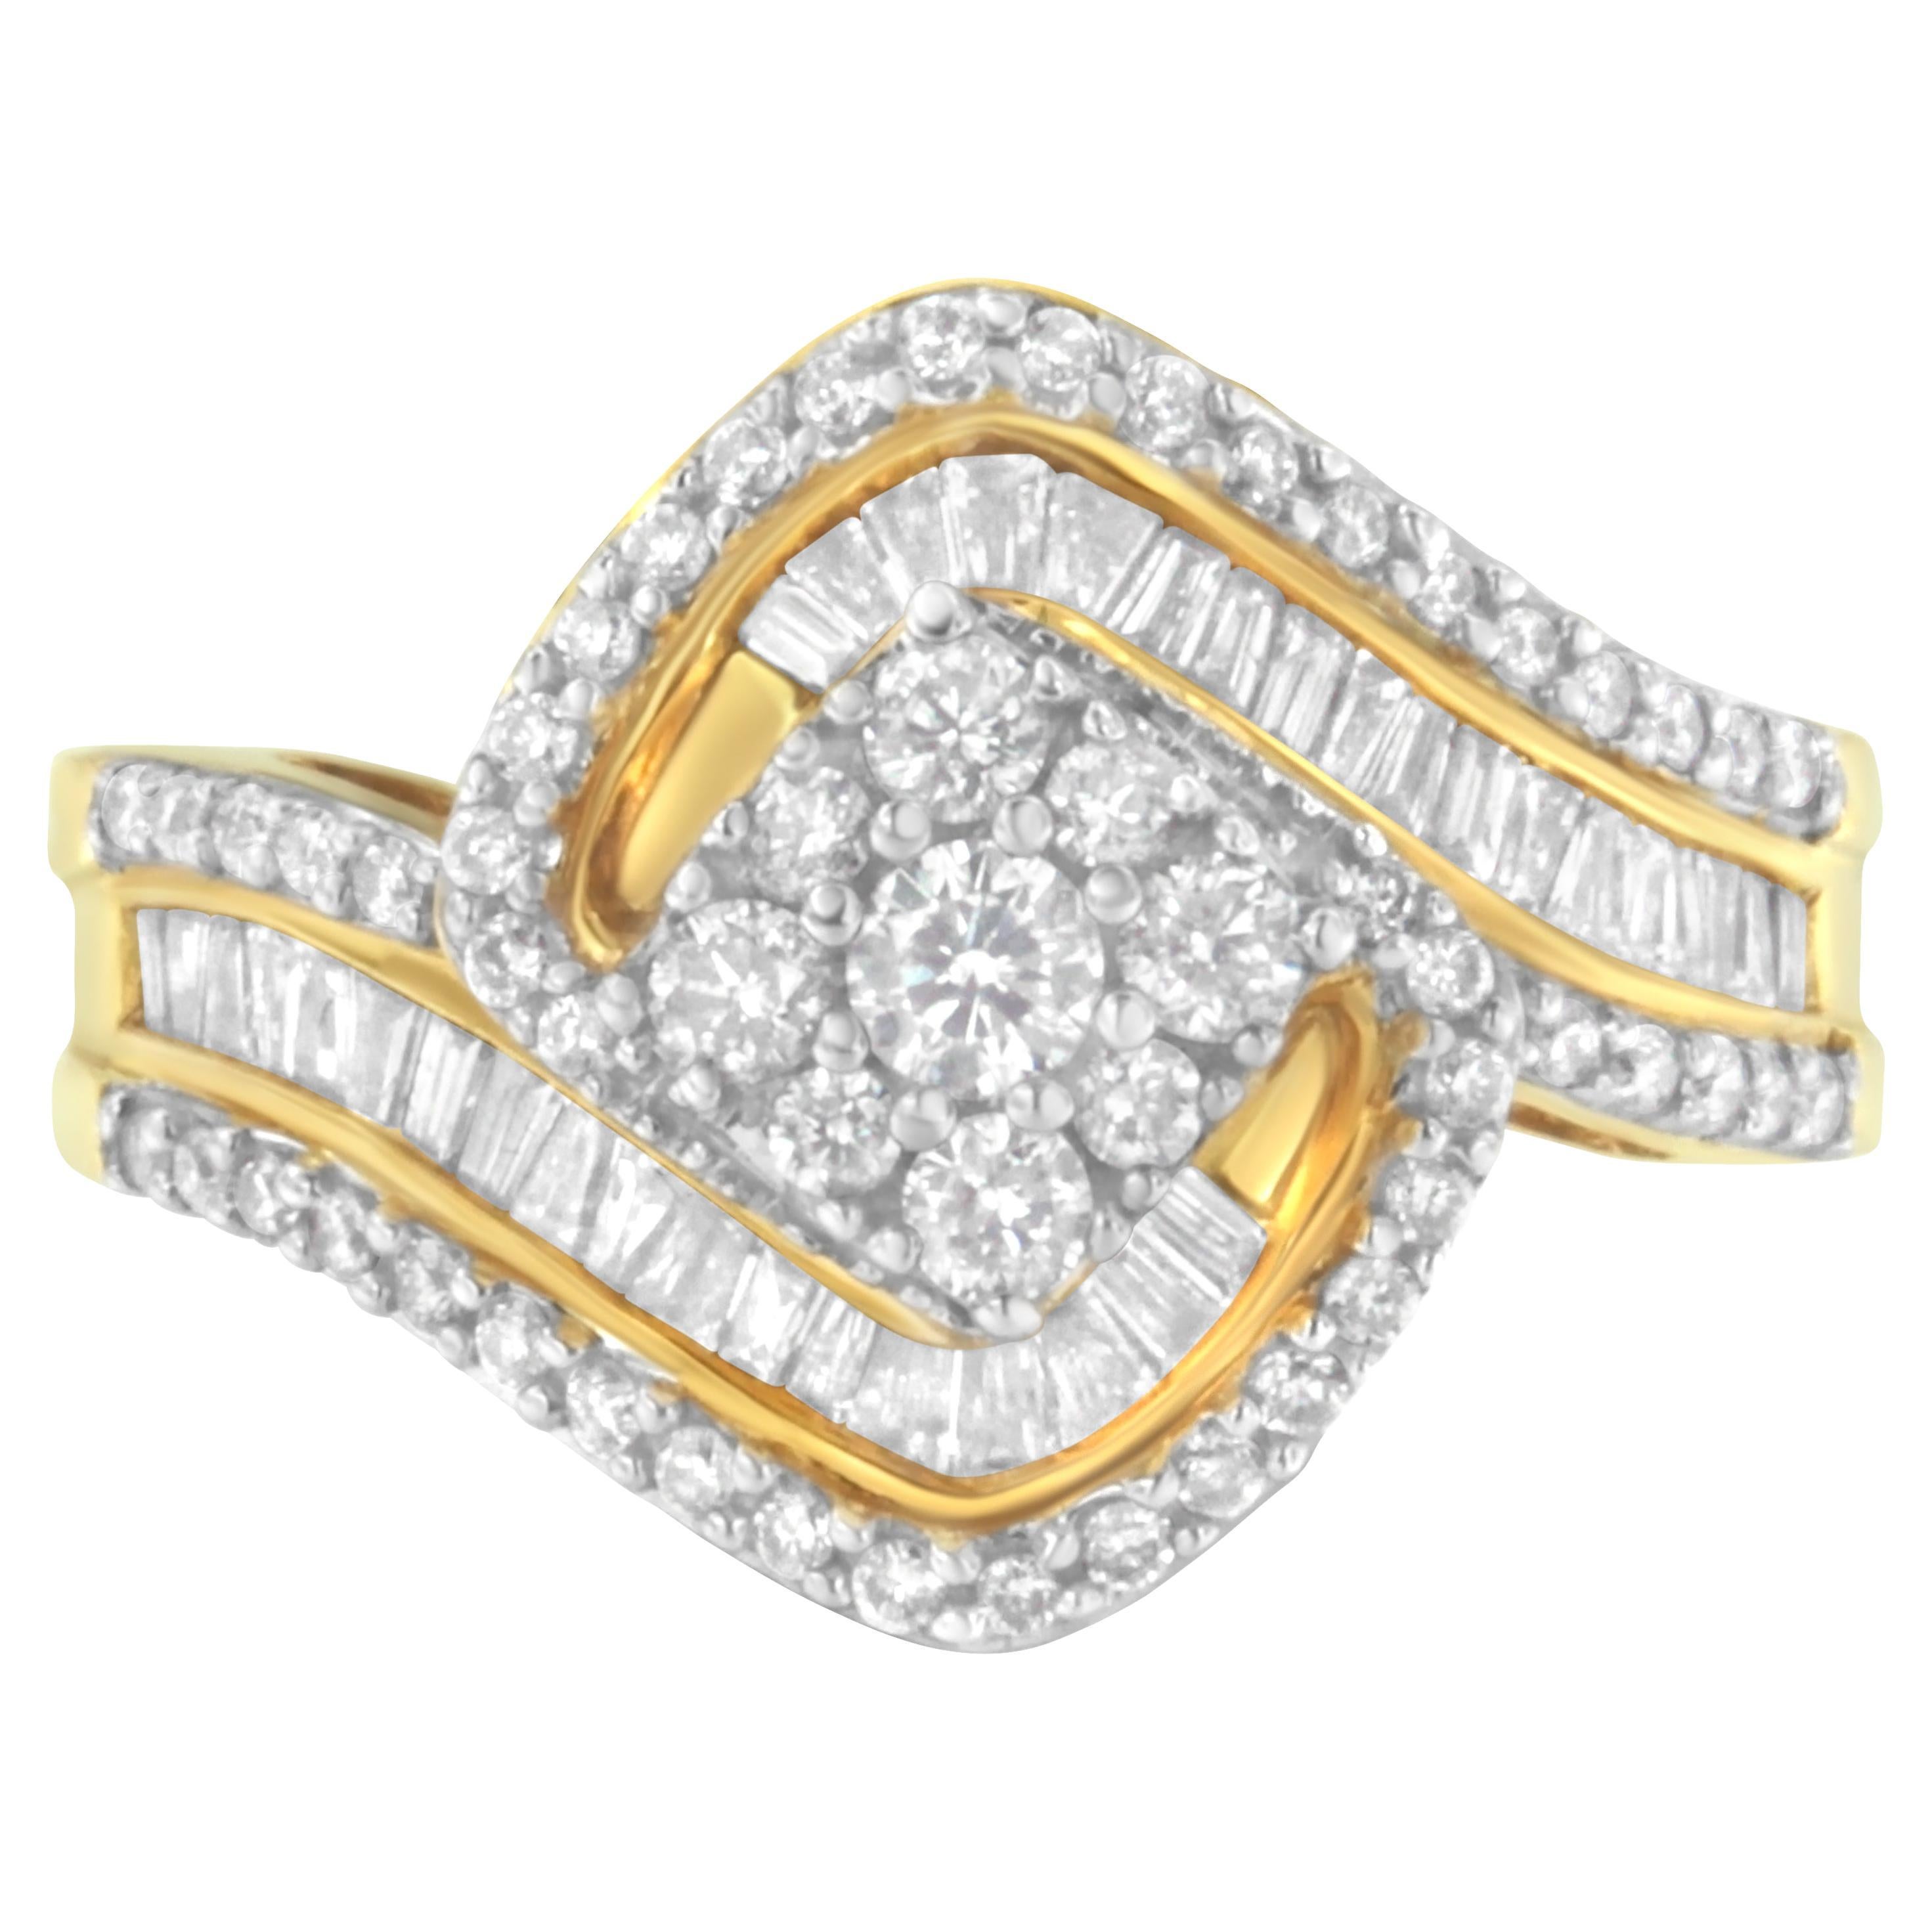 For Sale:  14K Yellow Gold 1.00 Carat Diamond Bypass Cluster Ring